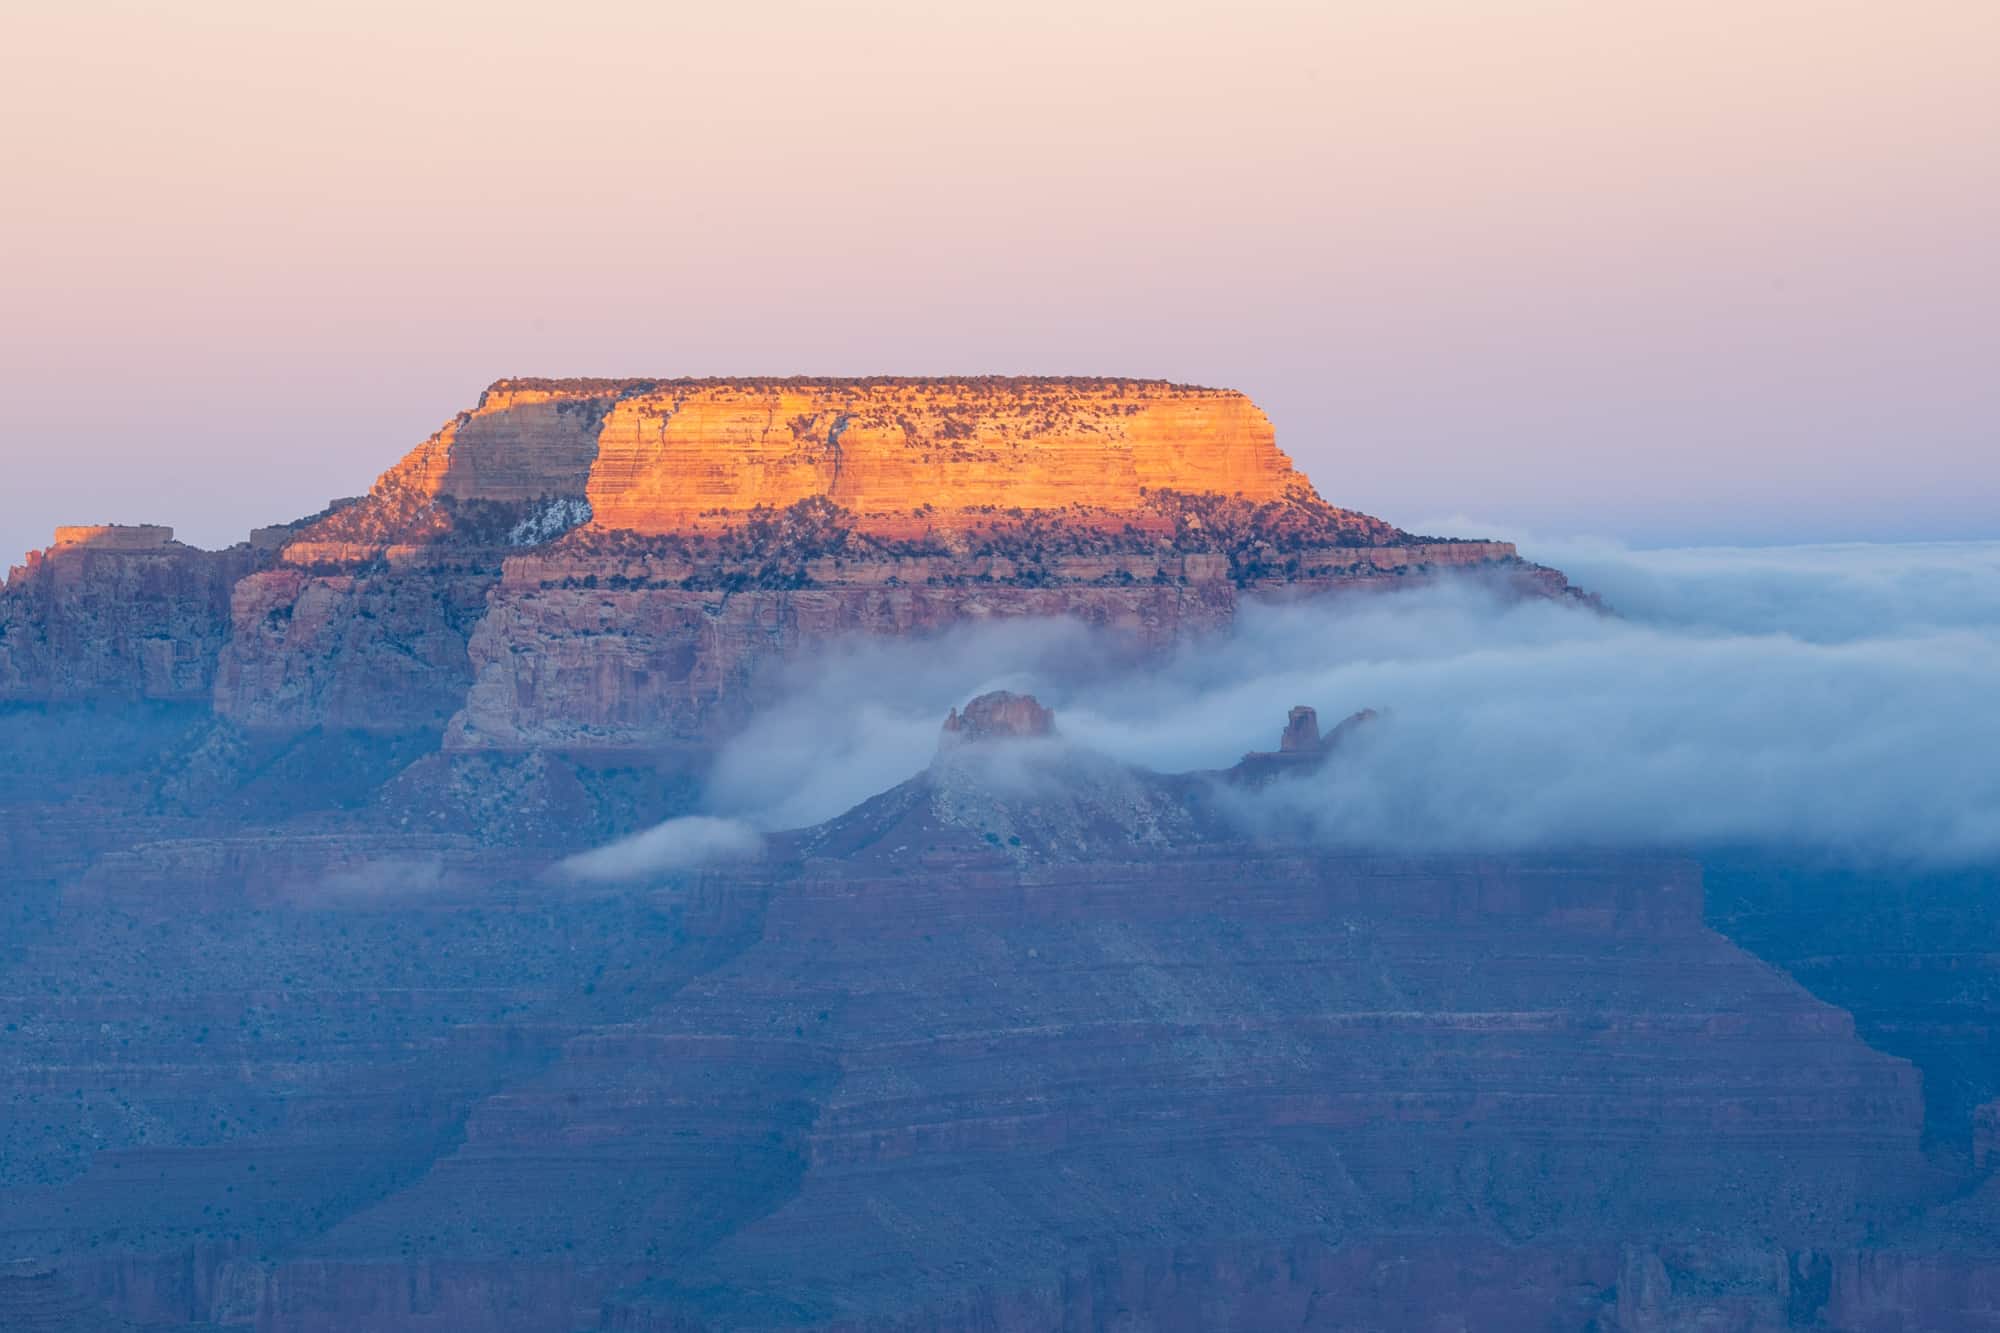 the grand canyon at sunset with some low lying clouds, views like this are often seen during private grand canyon tours from sedona